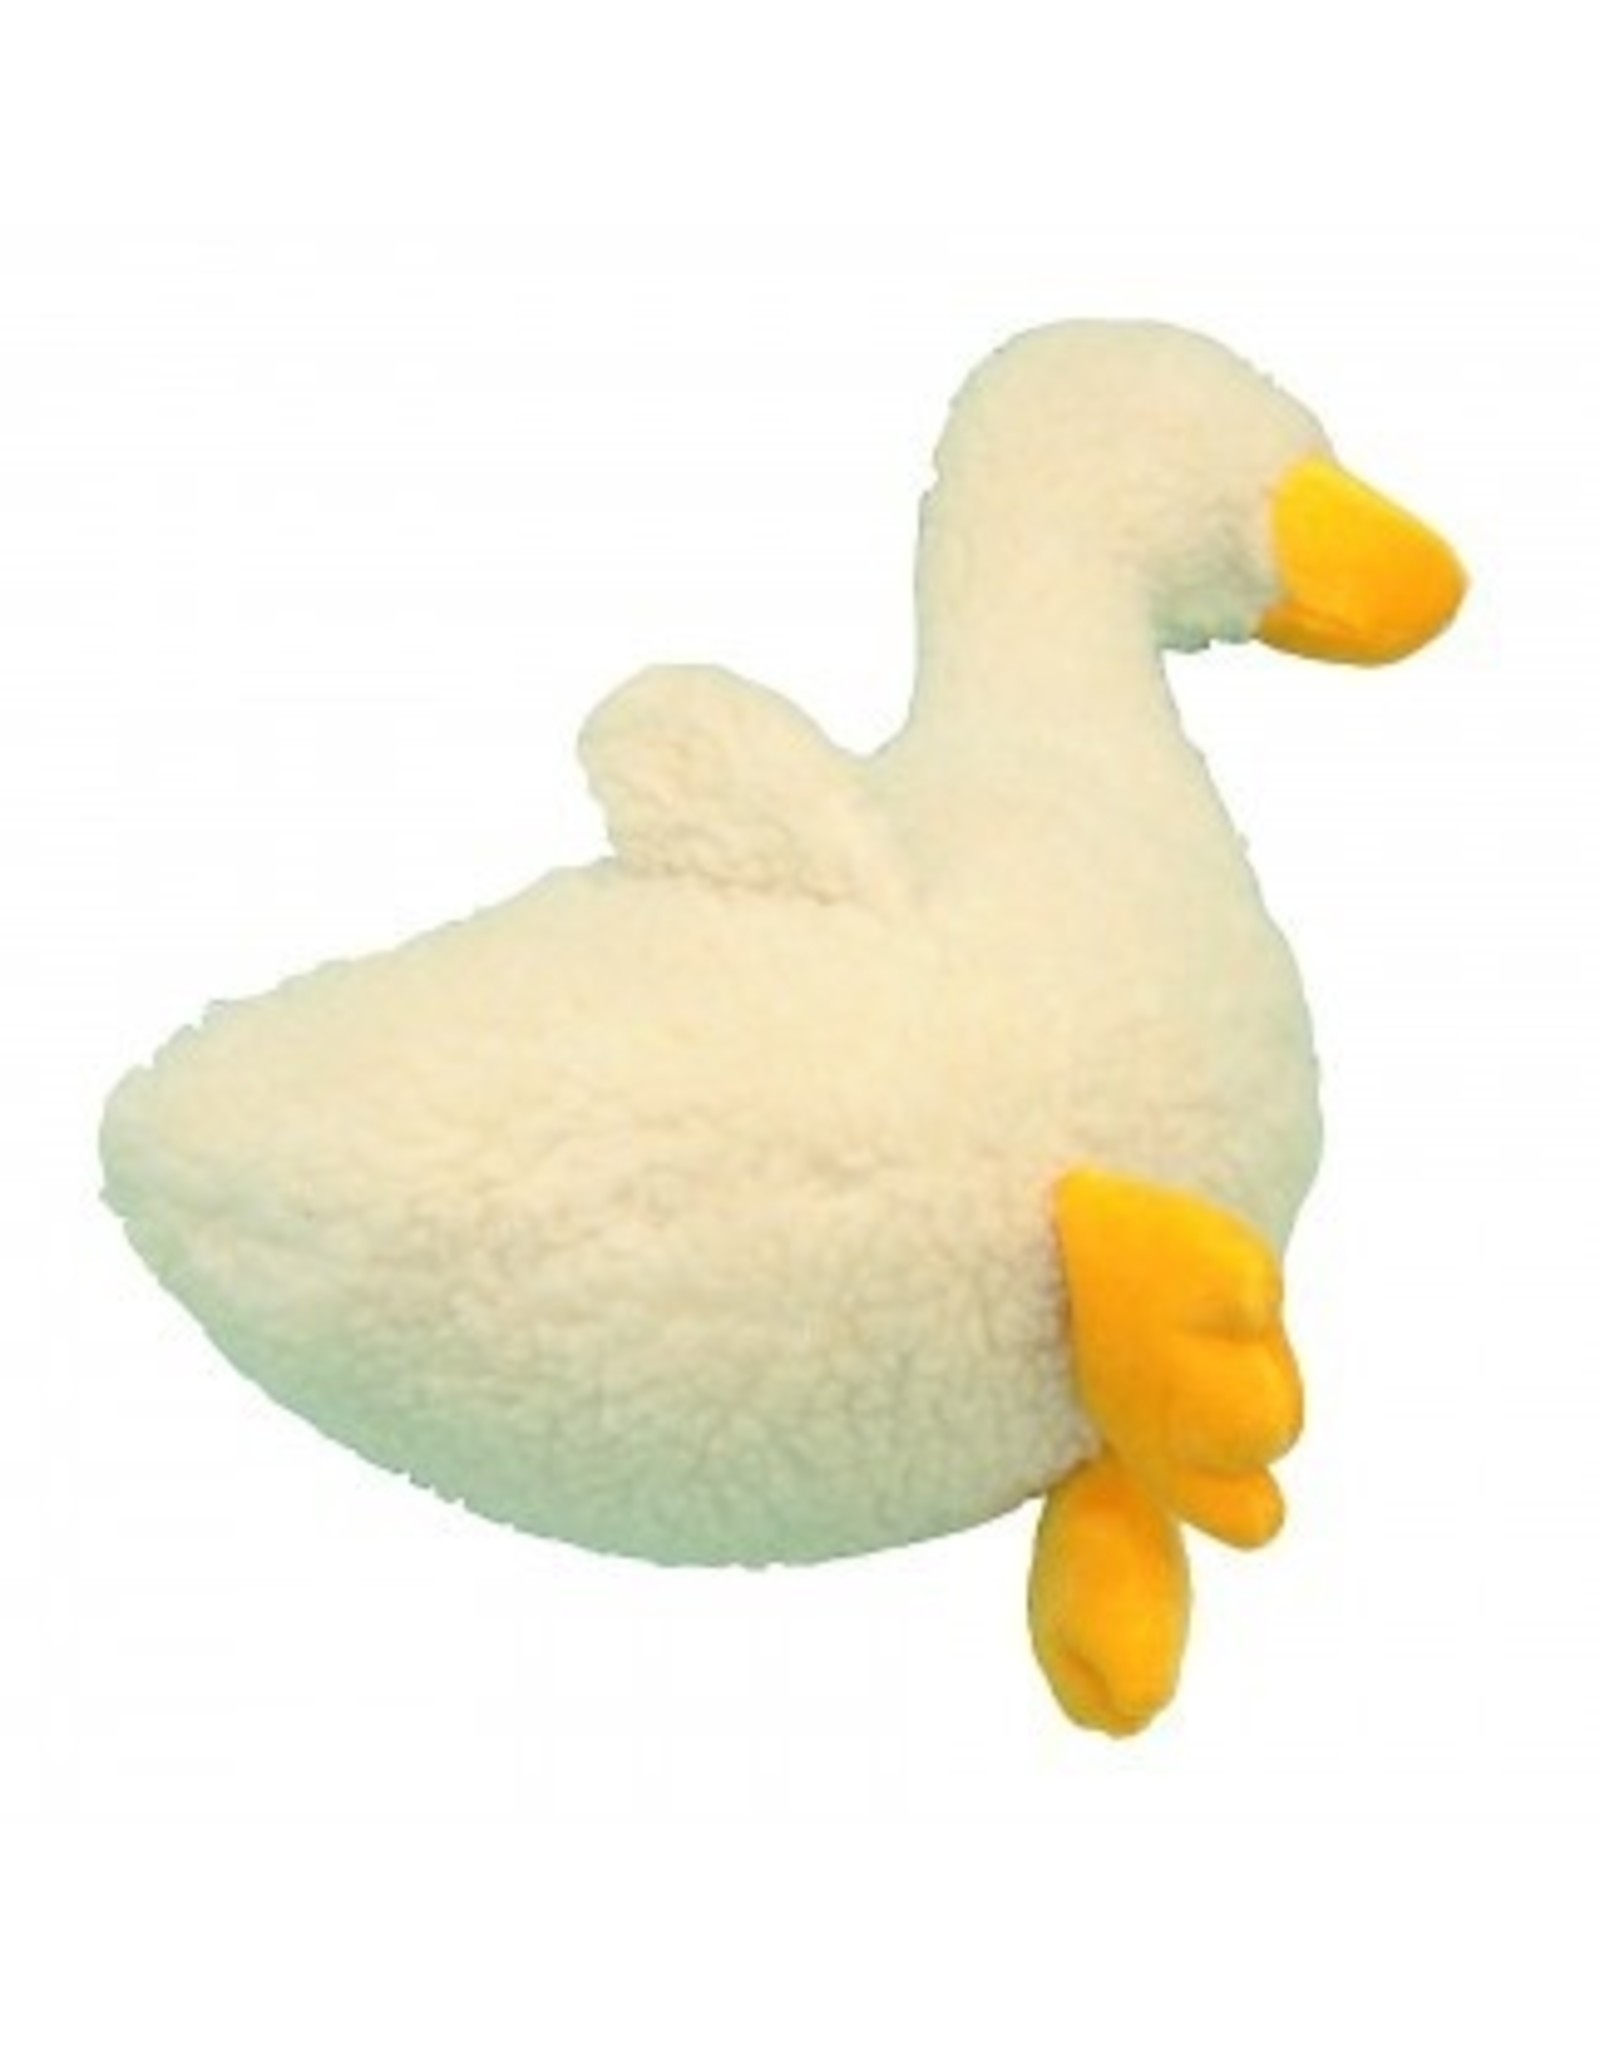 ETHICAL PRODUCTS, INC. VERMONT FLEECE DUCK 13"